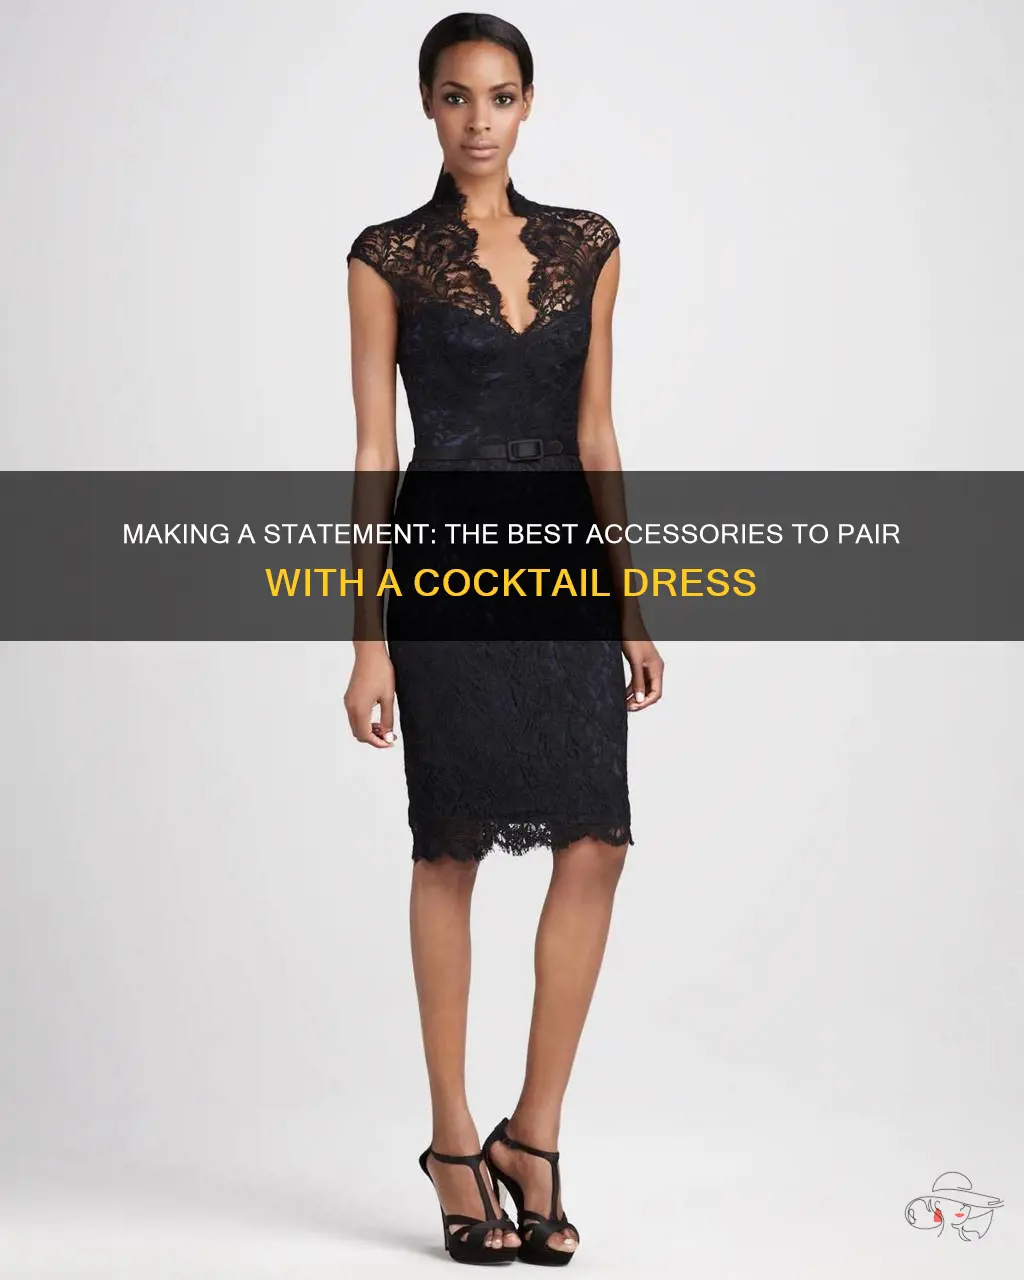 what can I take over the cocktail dress